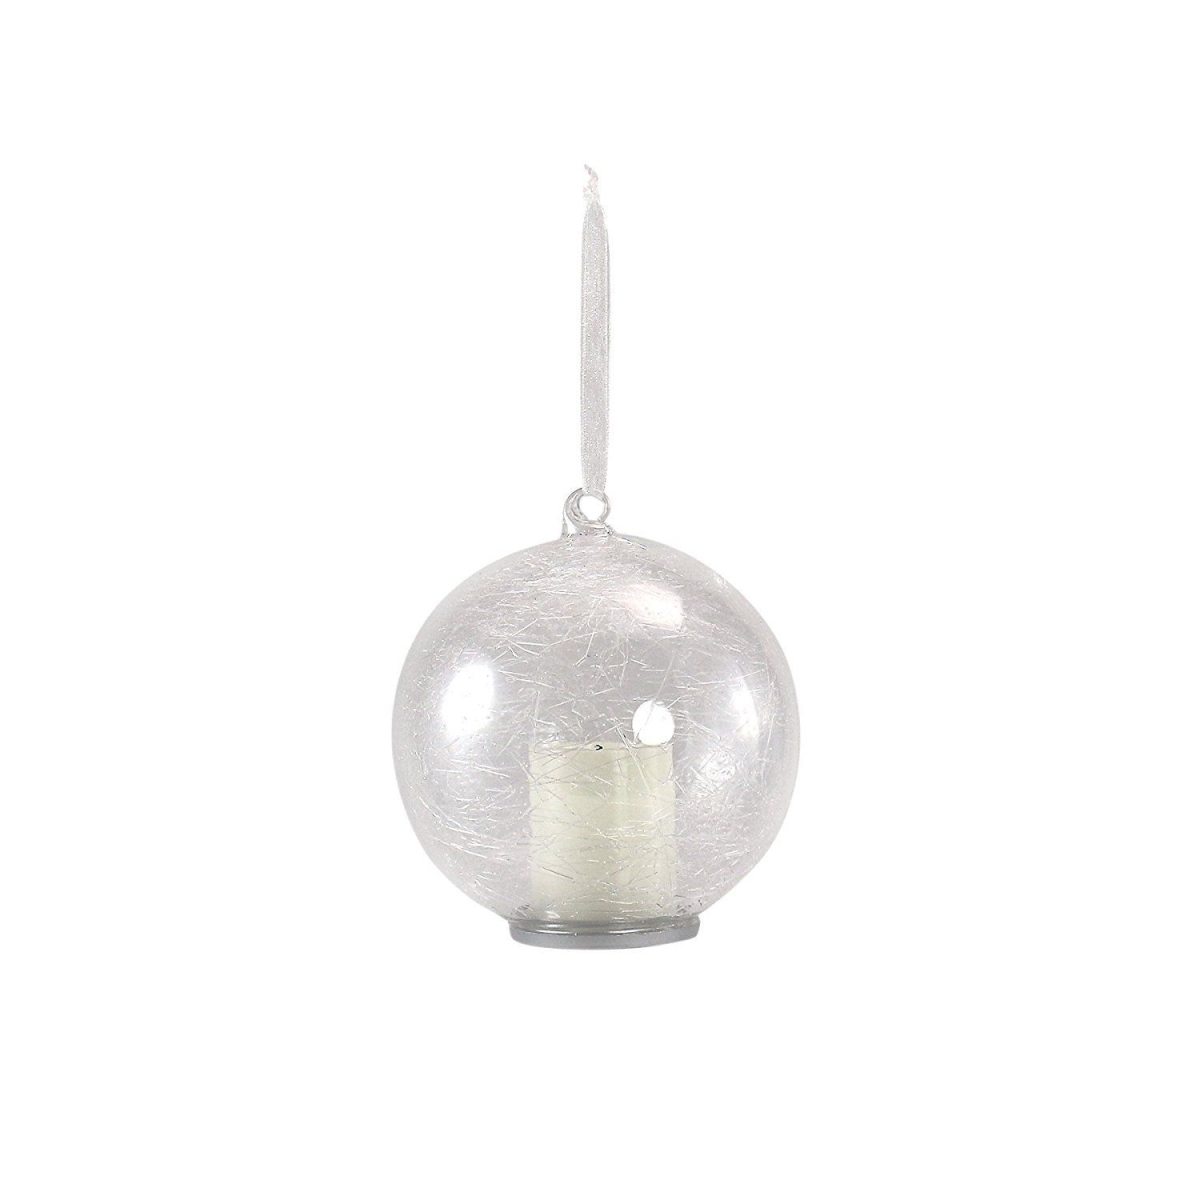 Dff-950 4 In. Dia. Light Up Ornament With Led Candle